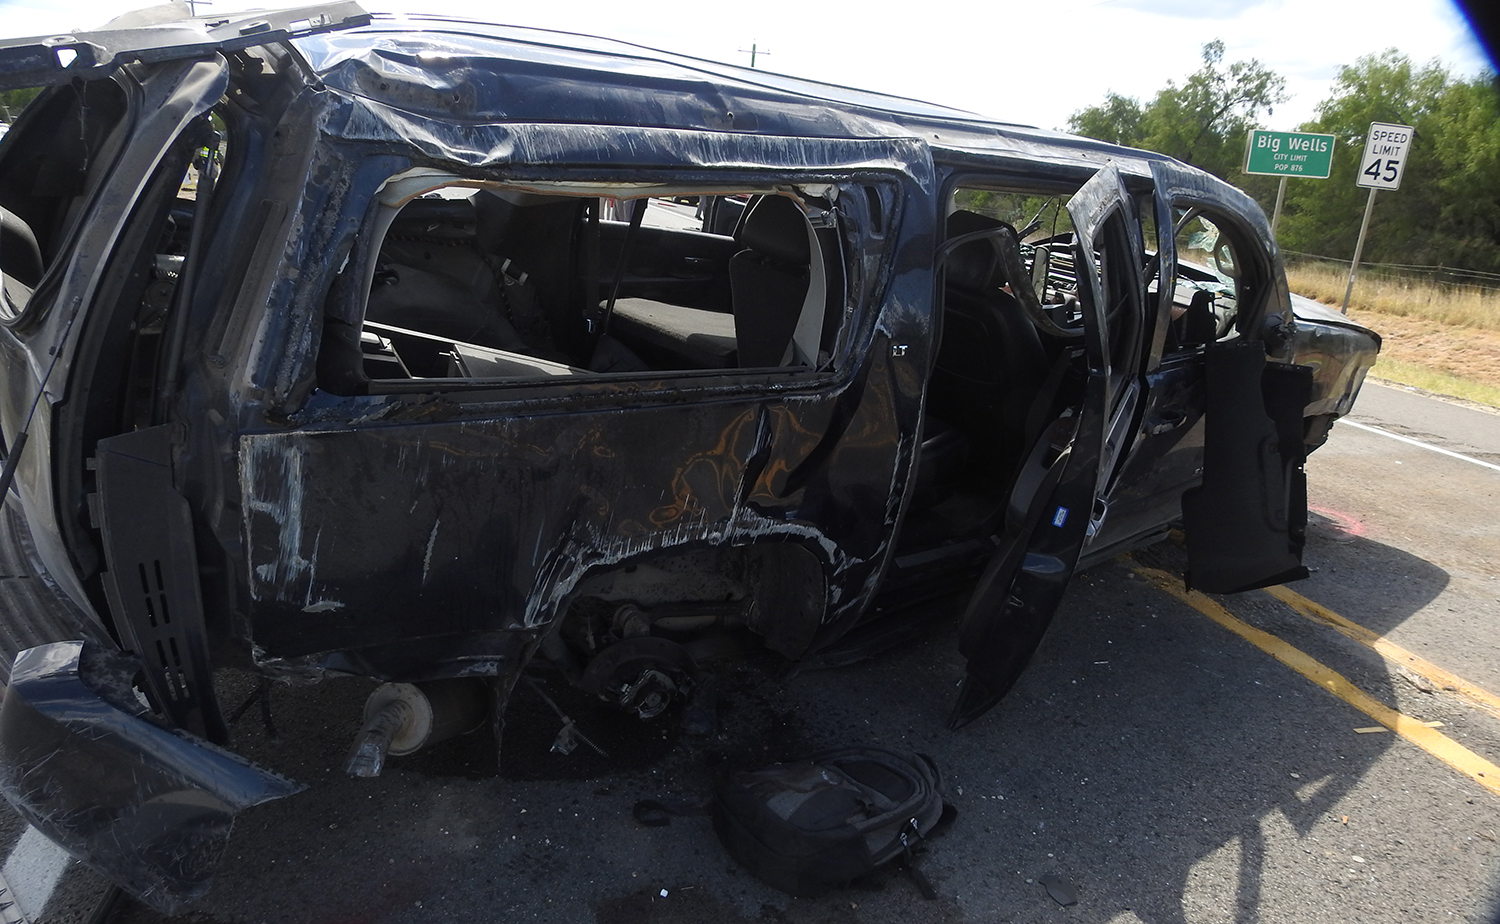 The vehicle driven by Jorge Luis Monsivais June 2018, a Chevy Tahoe, was discovered in a mangled state after the driver crashed following a police pursuit resulting in the death of five noncitizens.